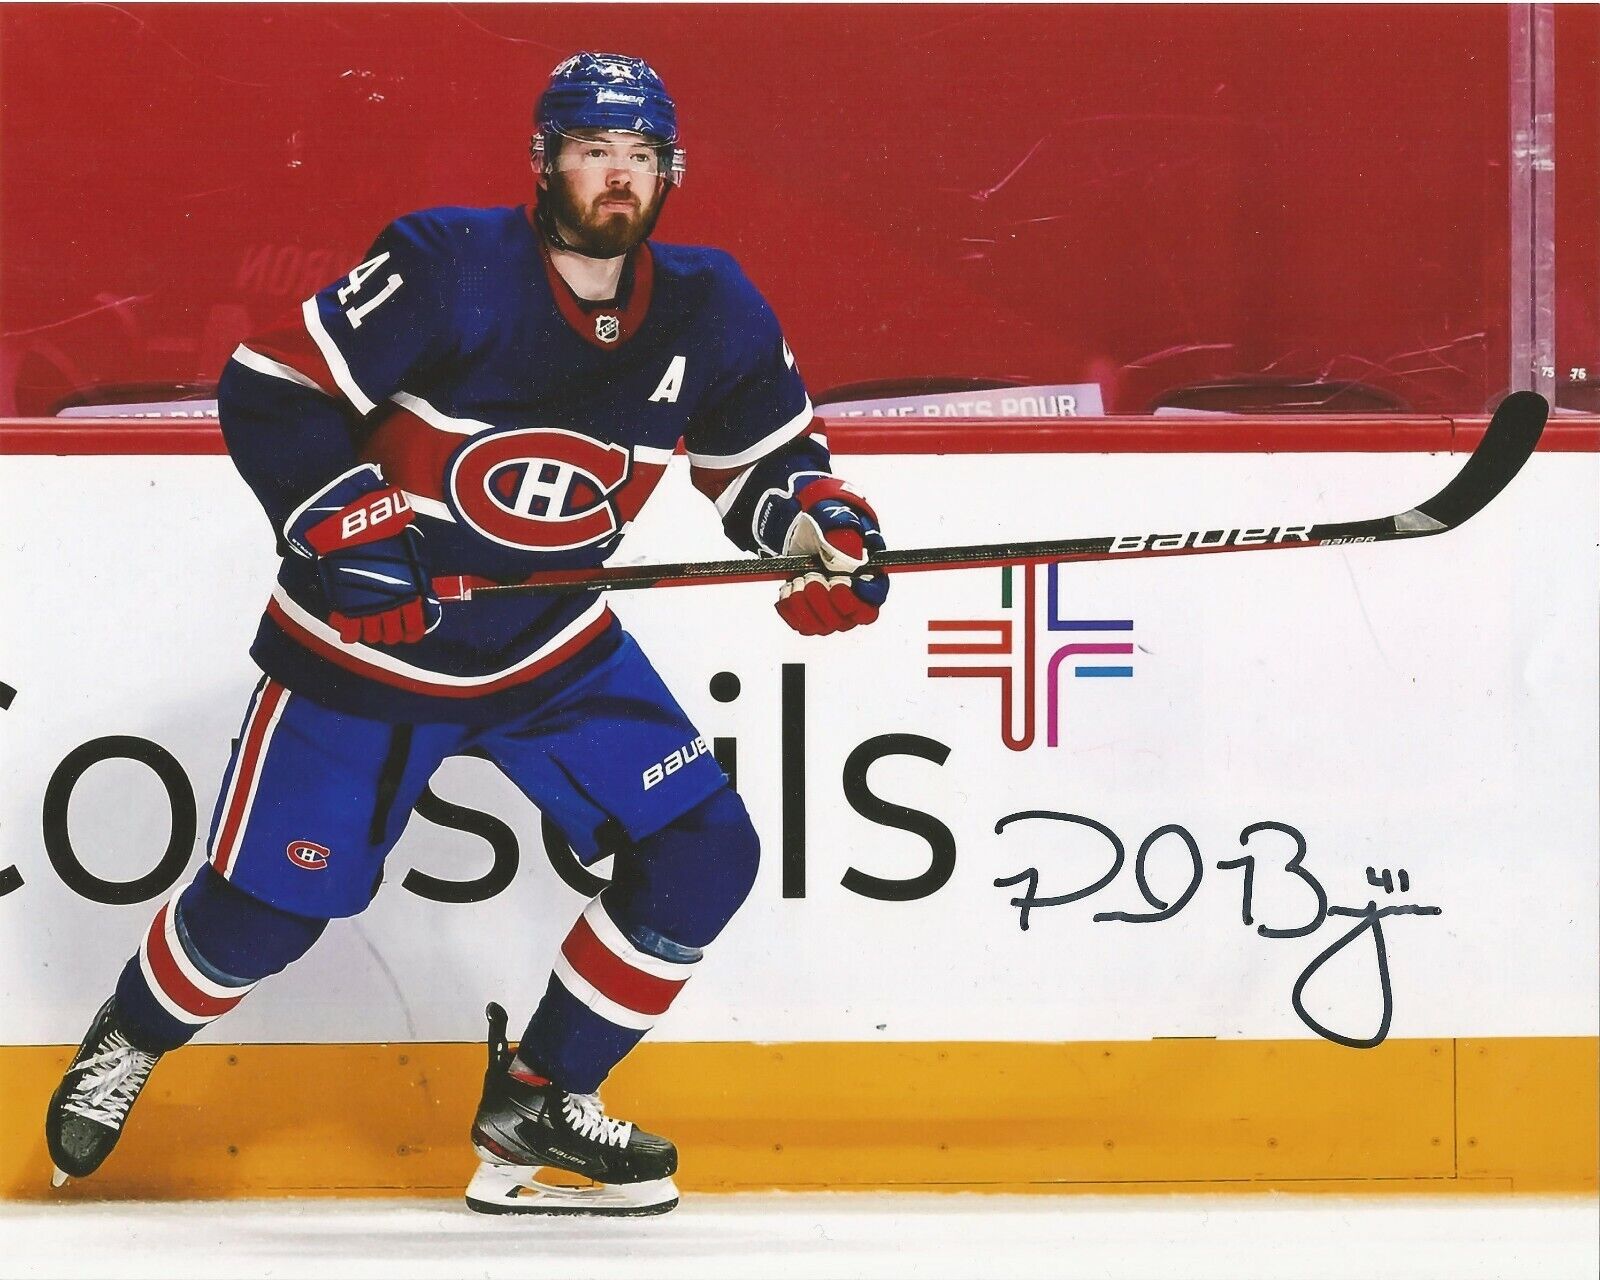 PAUL BYRON SIGNED MONTREAL CANADIENS 8x10 Photo Poster painting #1 w/COA